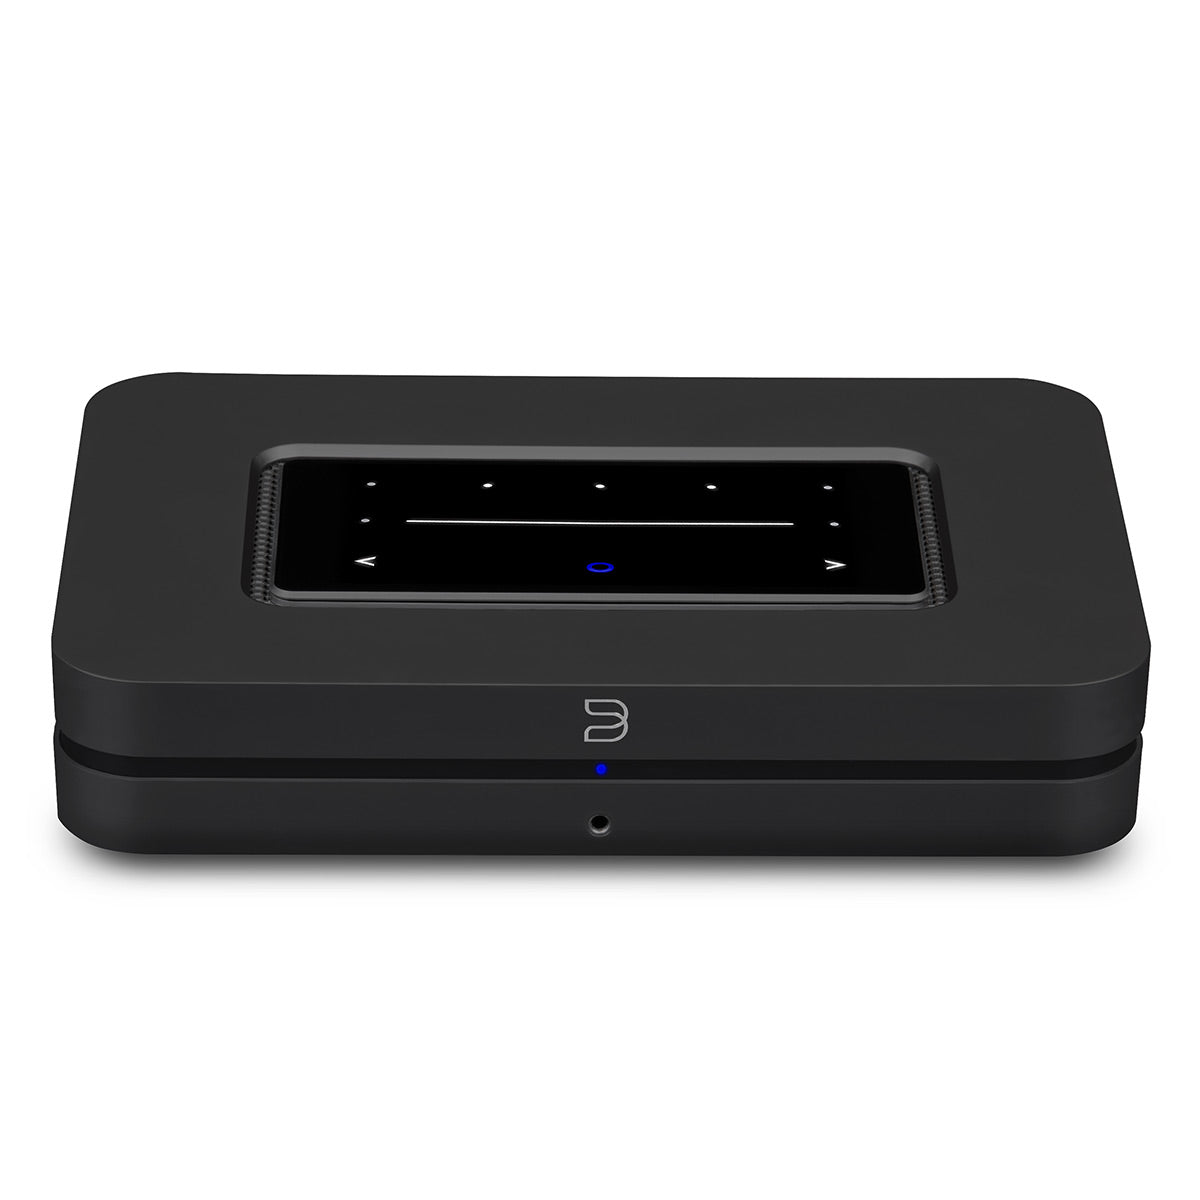 Bluesound Node Wireless Multi-Room Hi-Res Music Streamer - Gen 3 (Black) with RC1 Remote Control for BluOS Systems